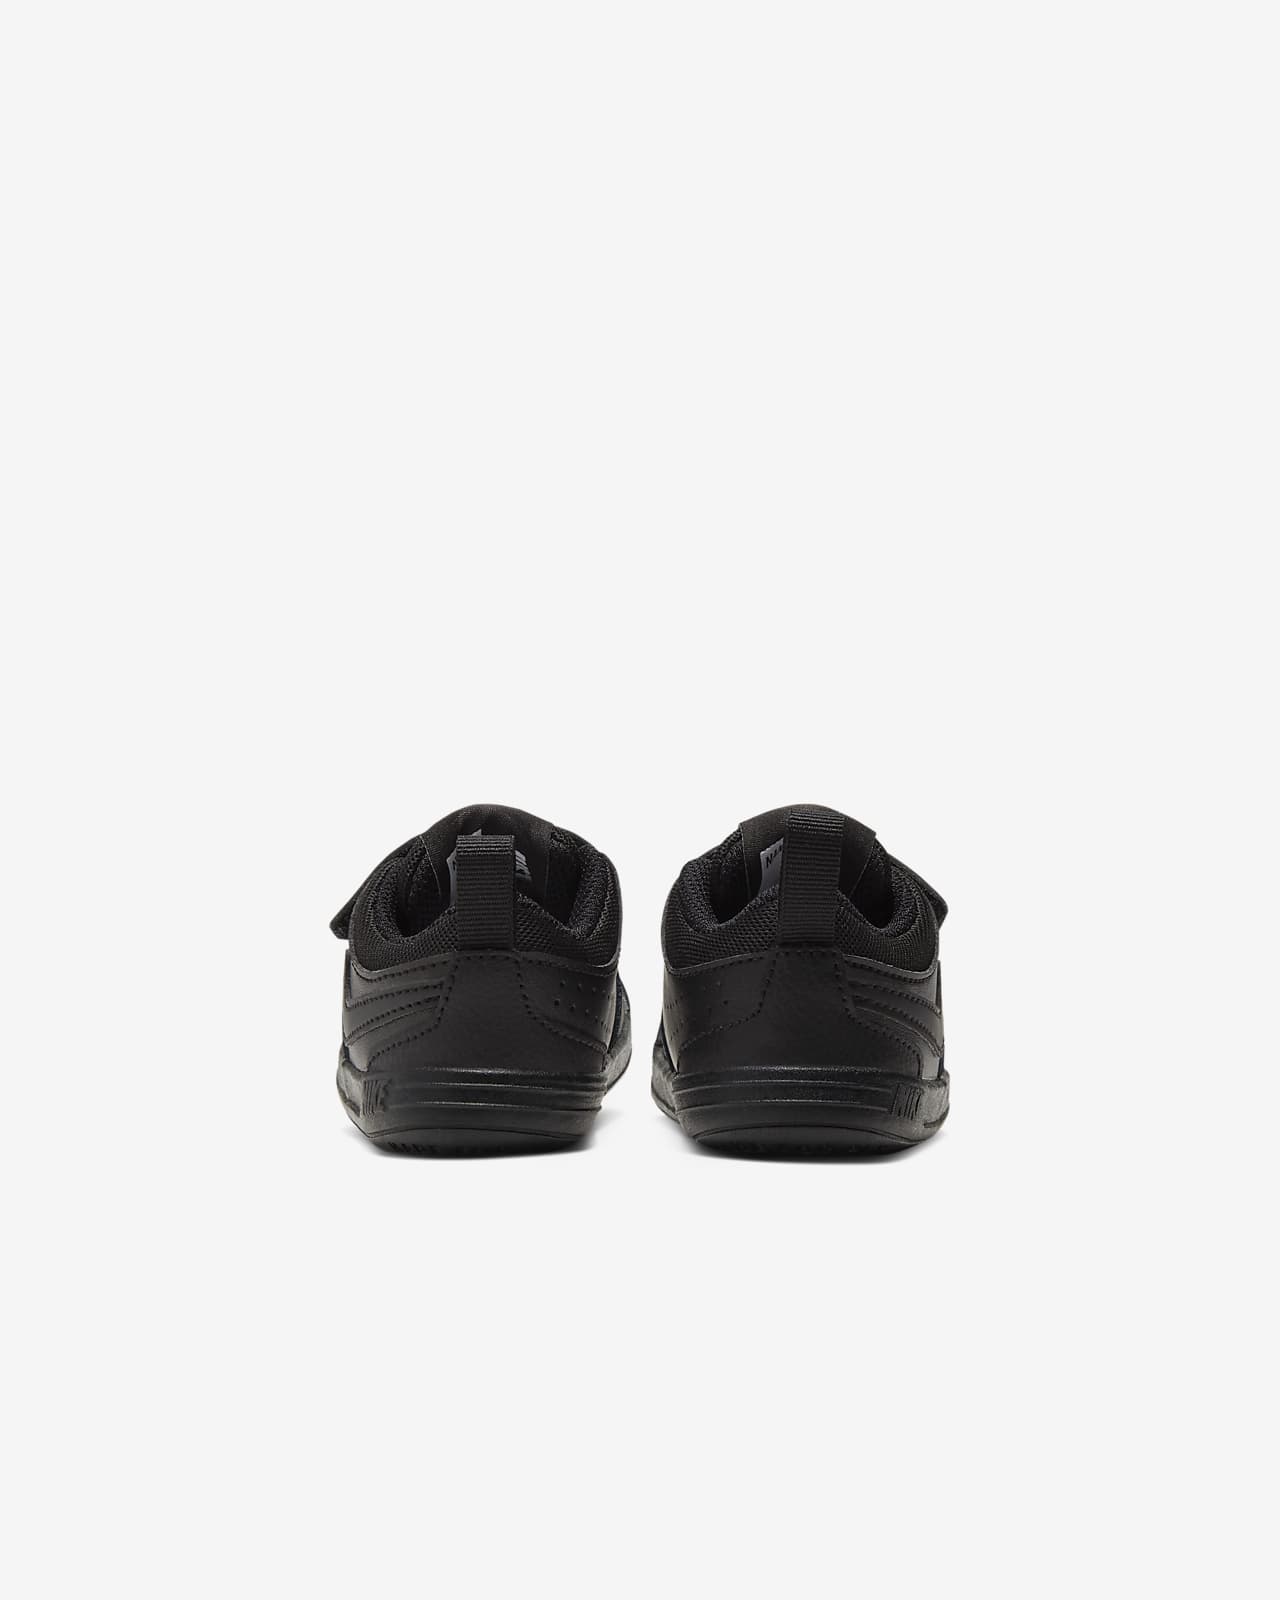 Nike Pico 5 Baby & Toddler Shoes. ID